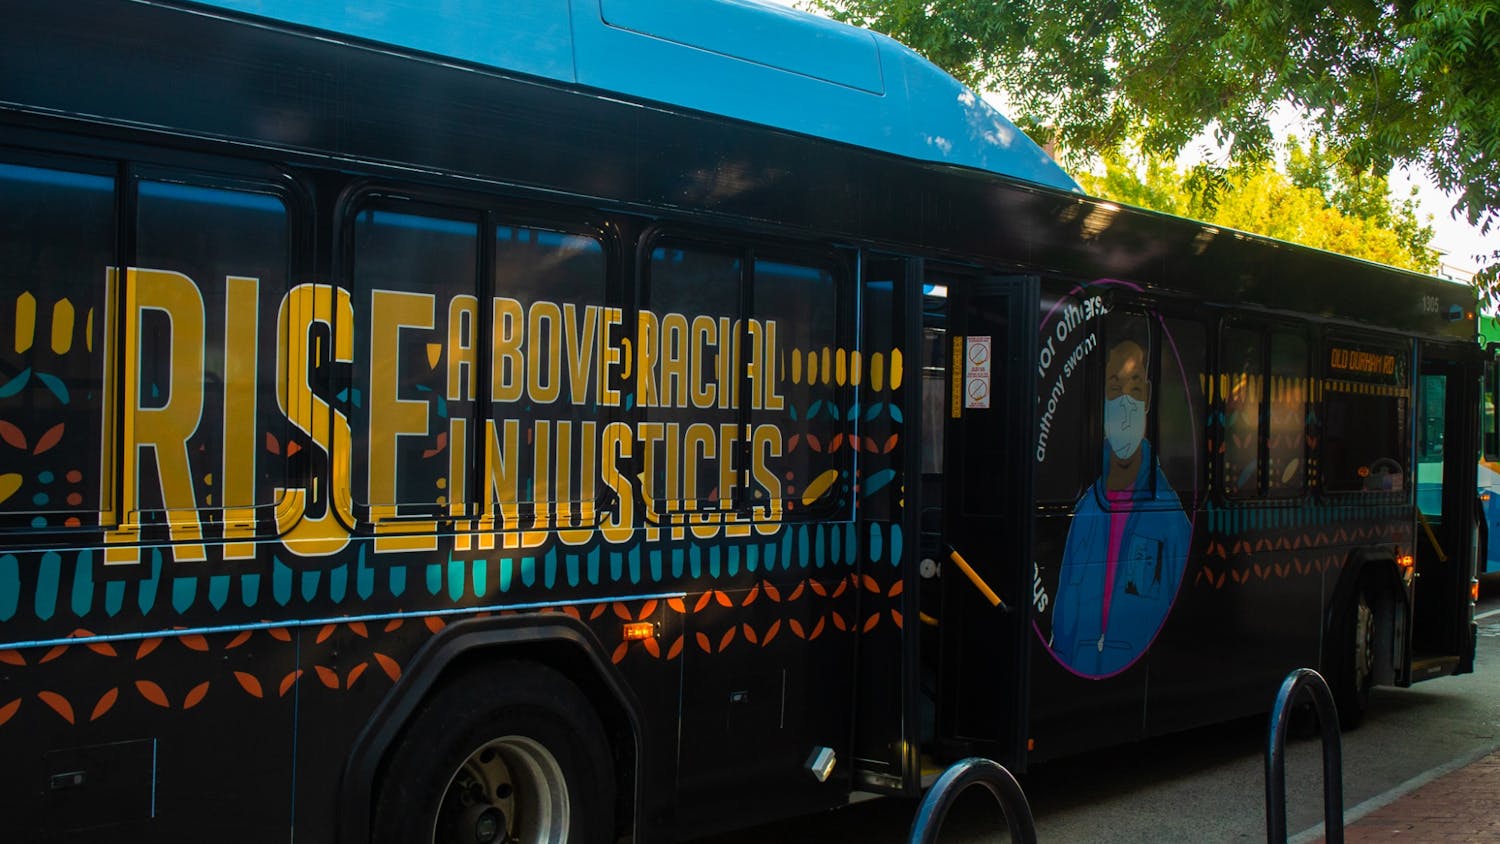 The new art bus, highlighting the the ongoing struggle for racial justice, stopped on Franklin Street for a break between stops.jpg